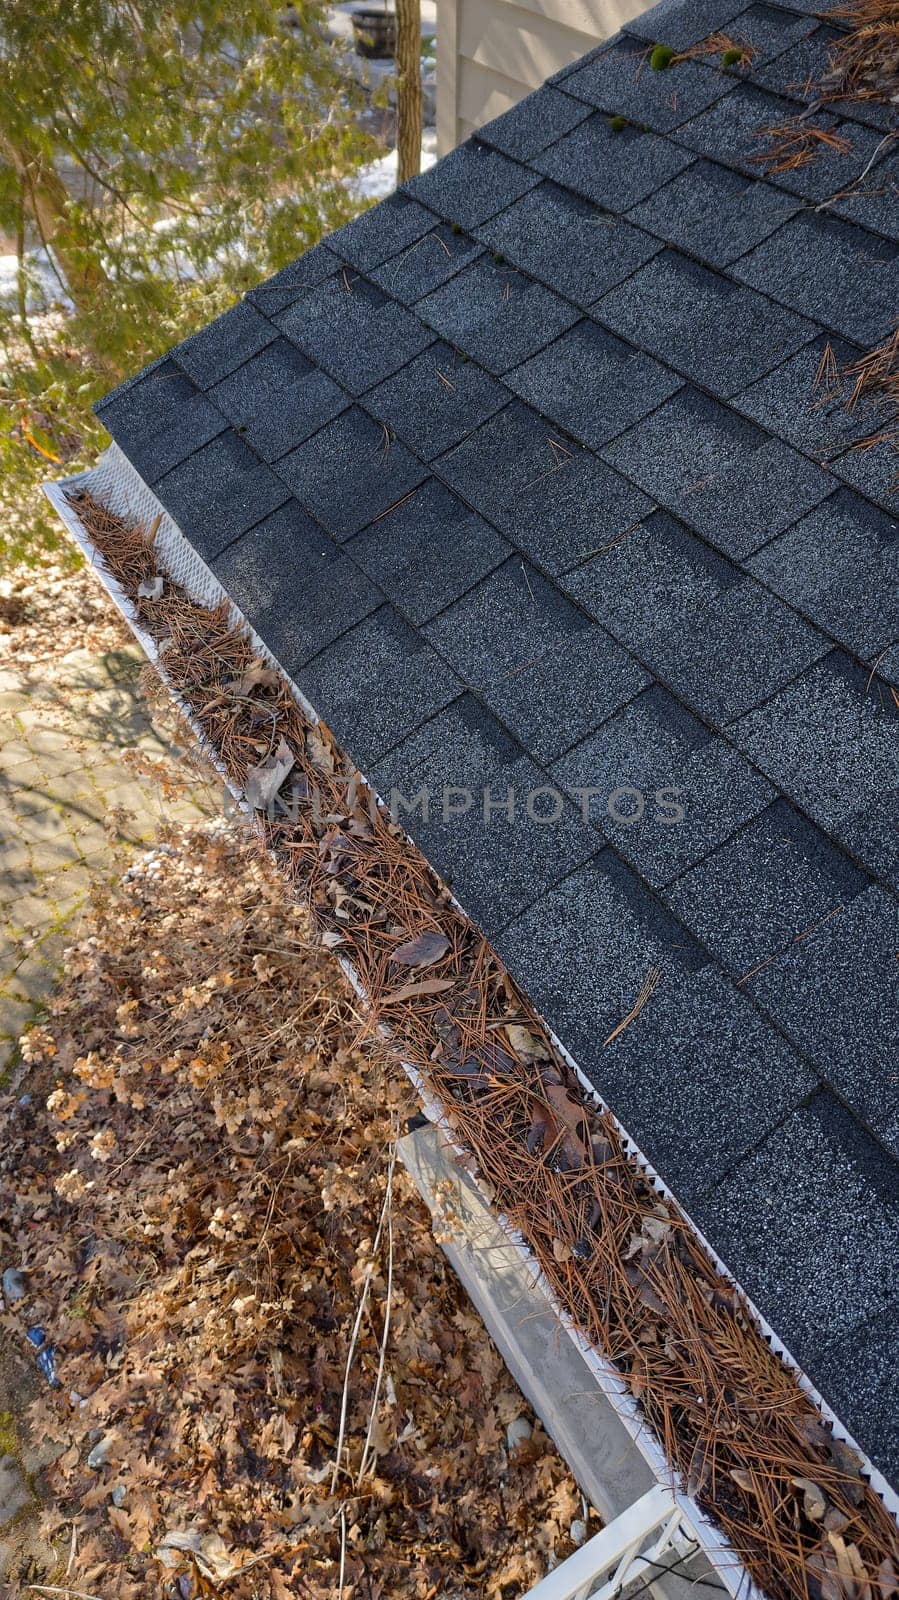 Drone view of residential rain gutter eavestrough filled with pine needles and tree debris. High quality photo